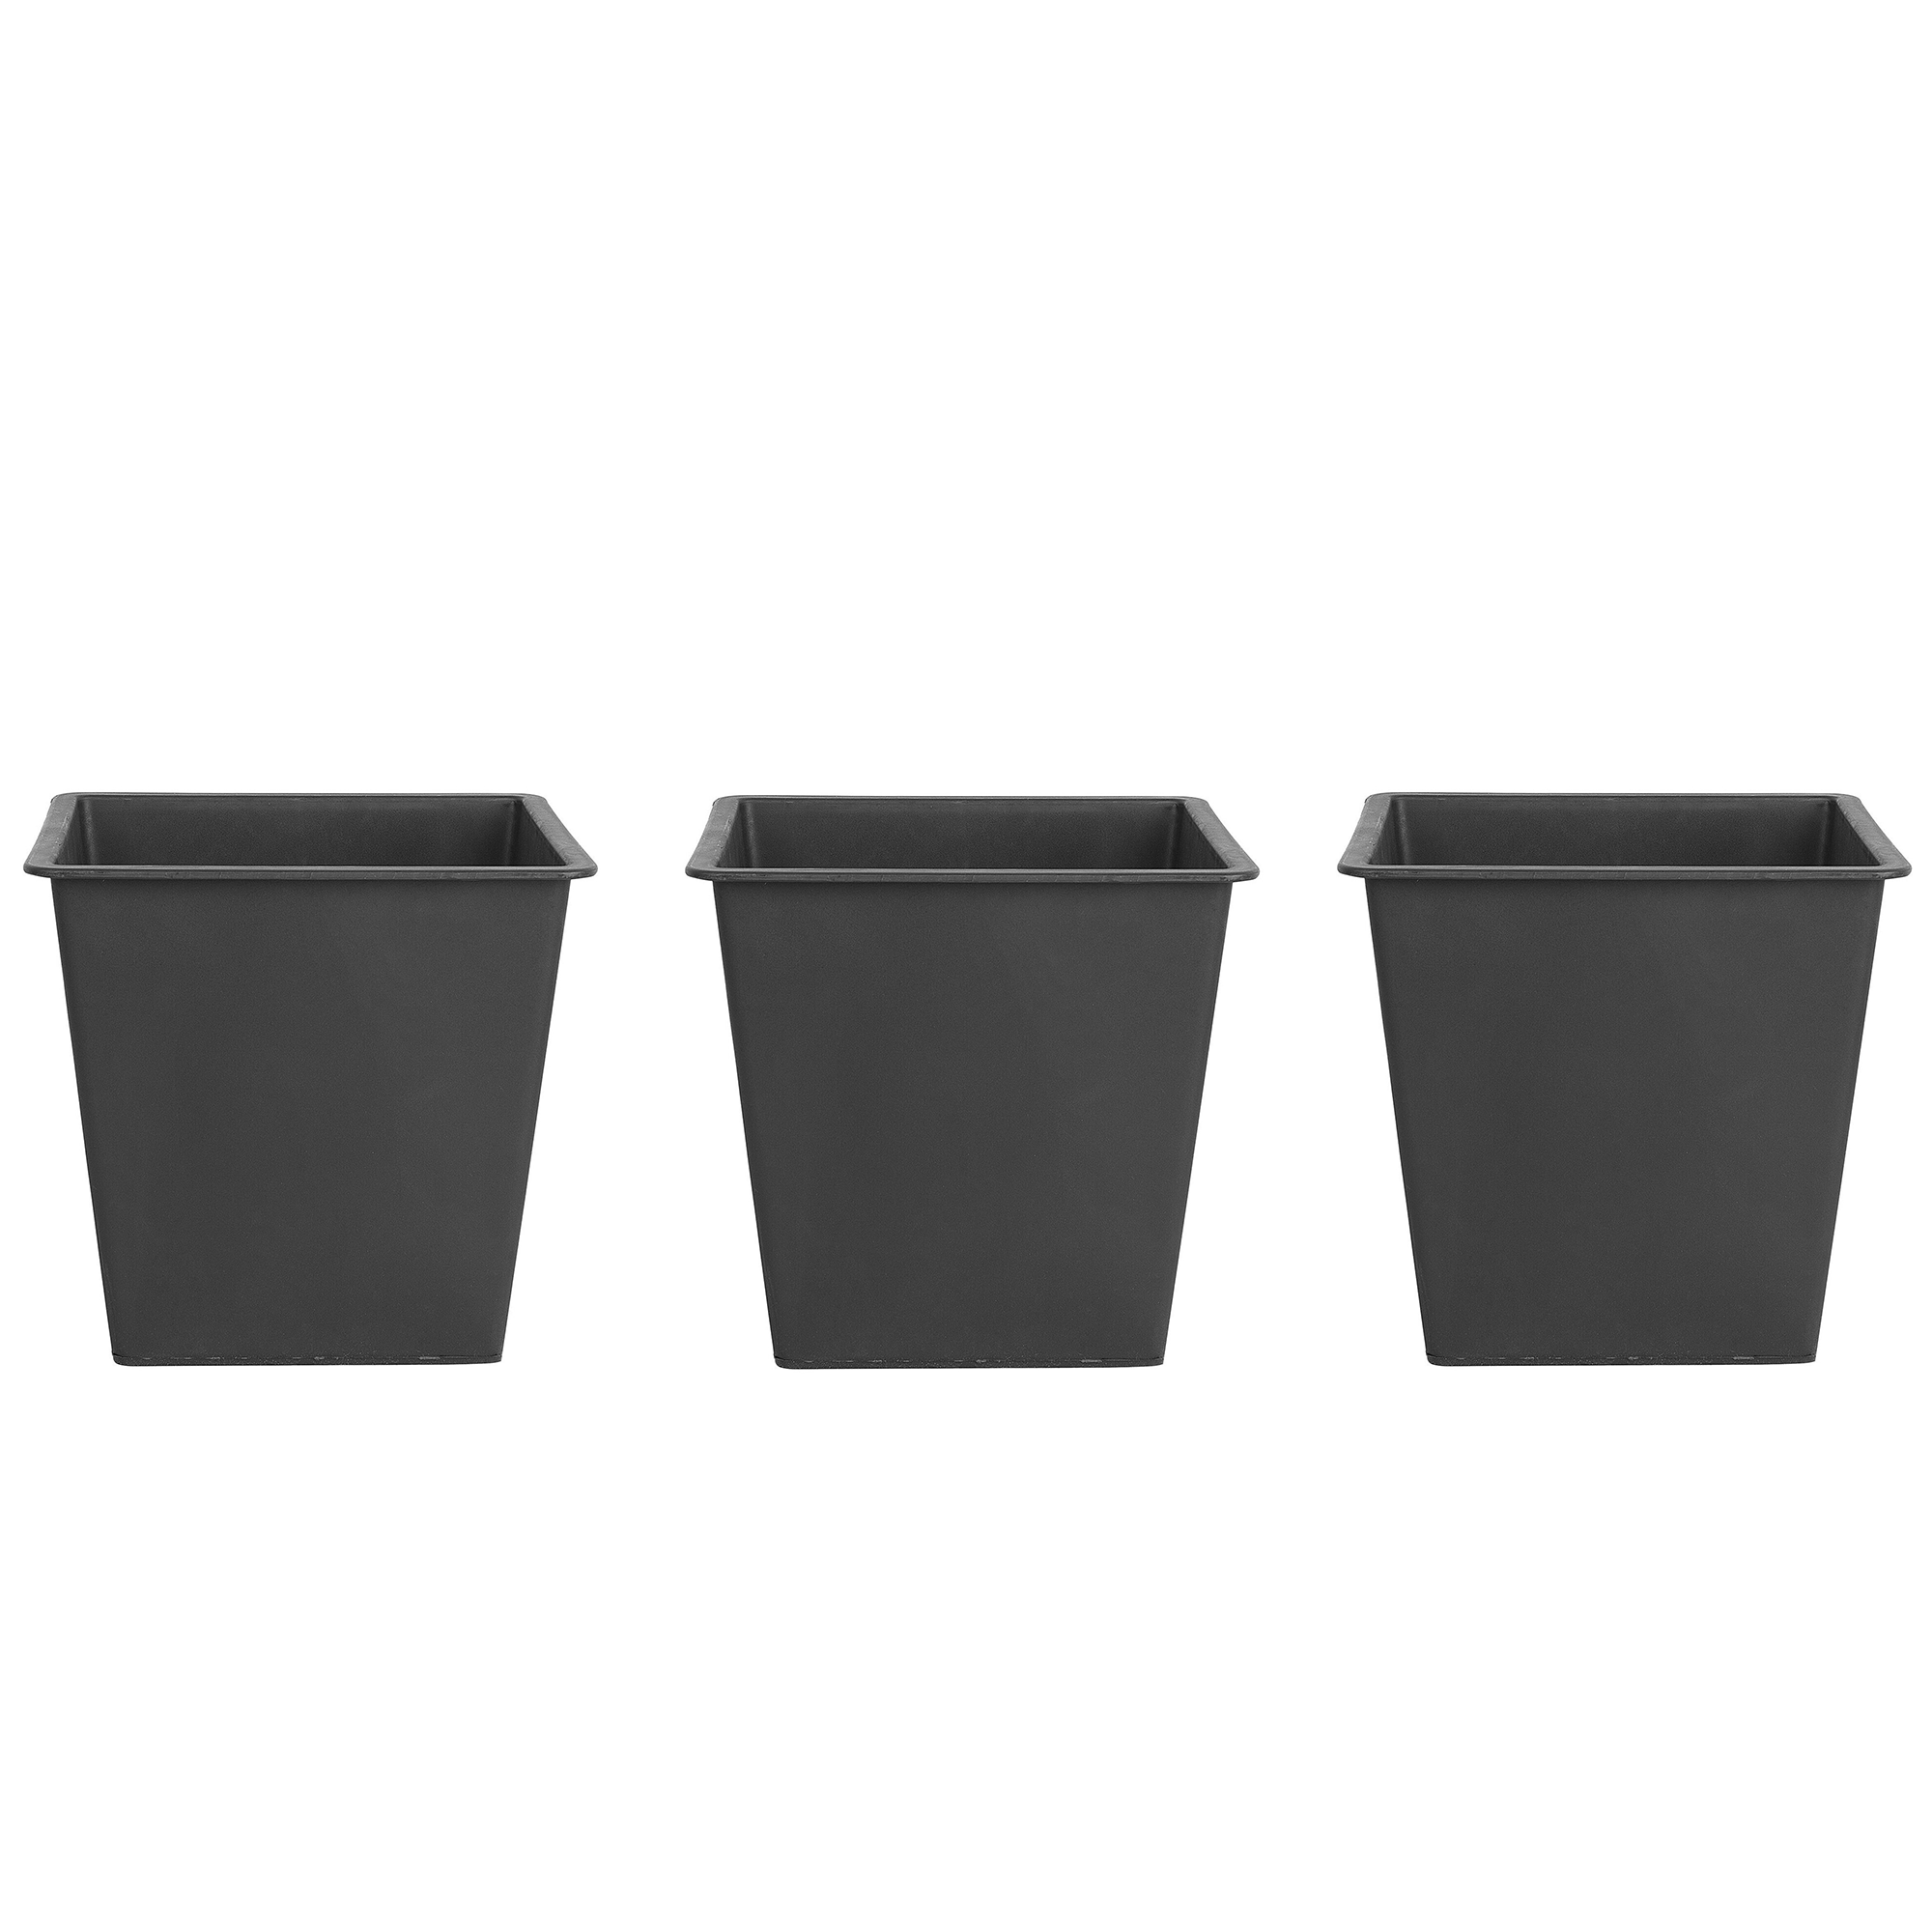 Beliani Set of 3 Square Plant Pot Protective Inserts Black Synthetic 42 x 42 x 38 cm Garden Outdoor